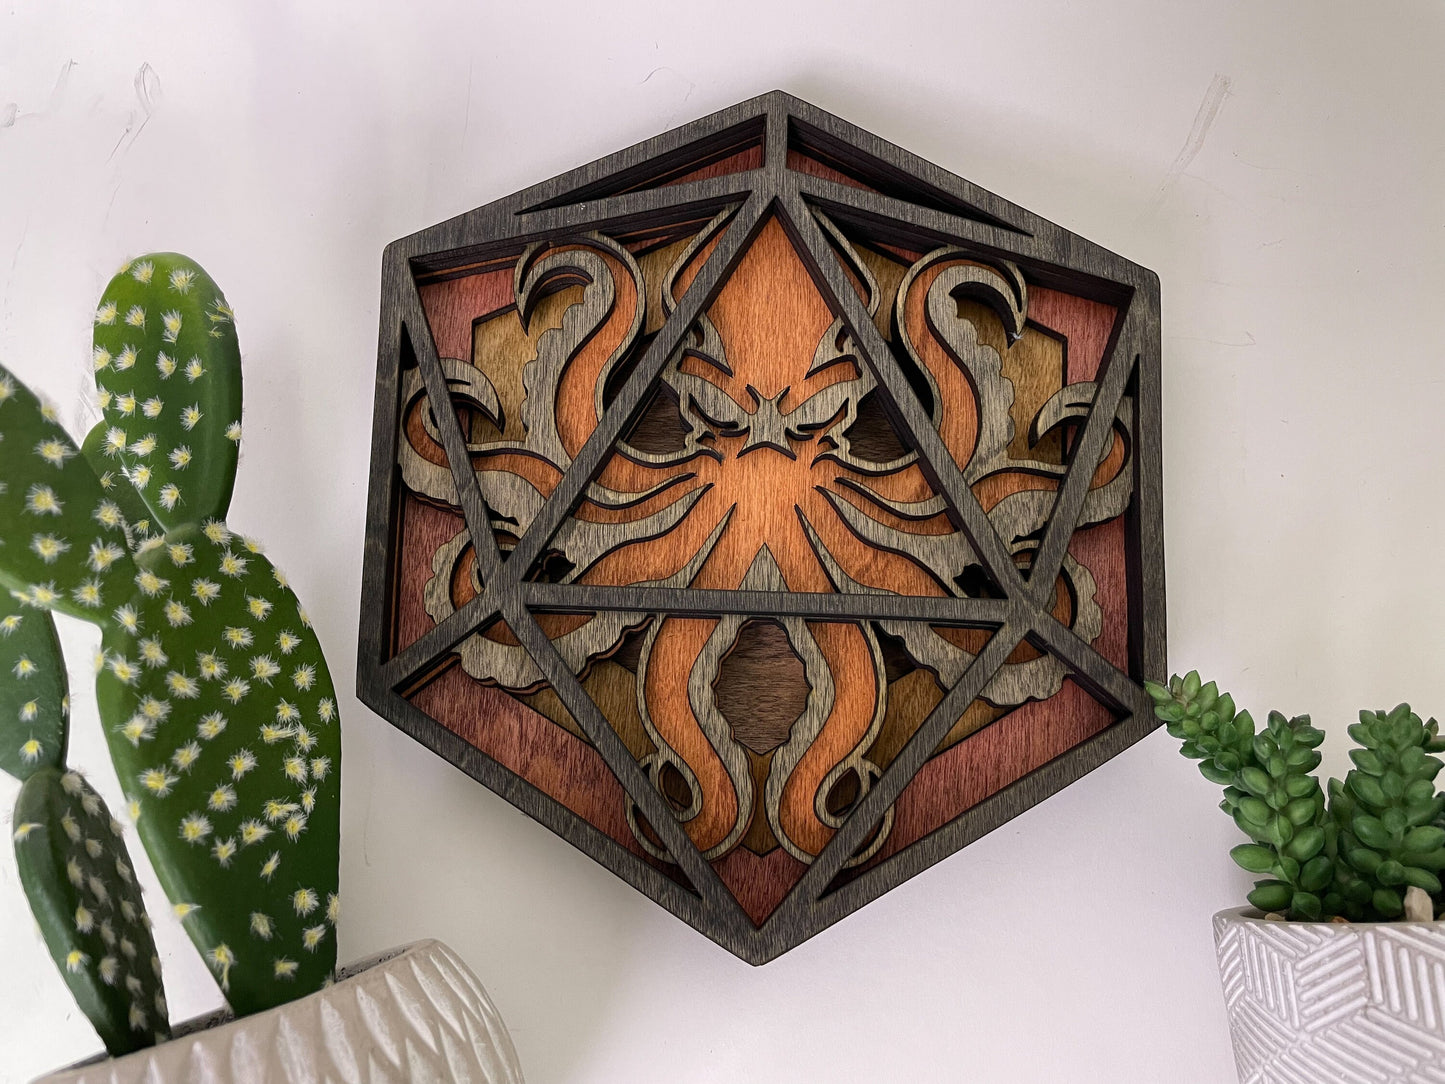 Kraken's Clutch - D20 Wooden Wall Art for Dungeons and Dragons Enthusiasts